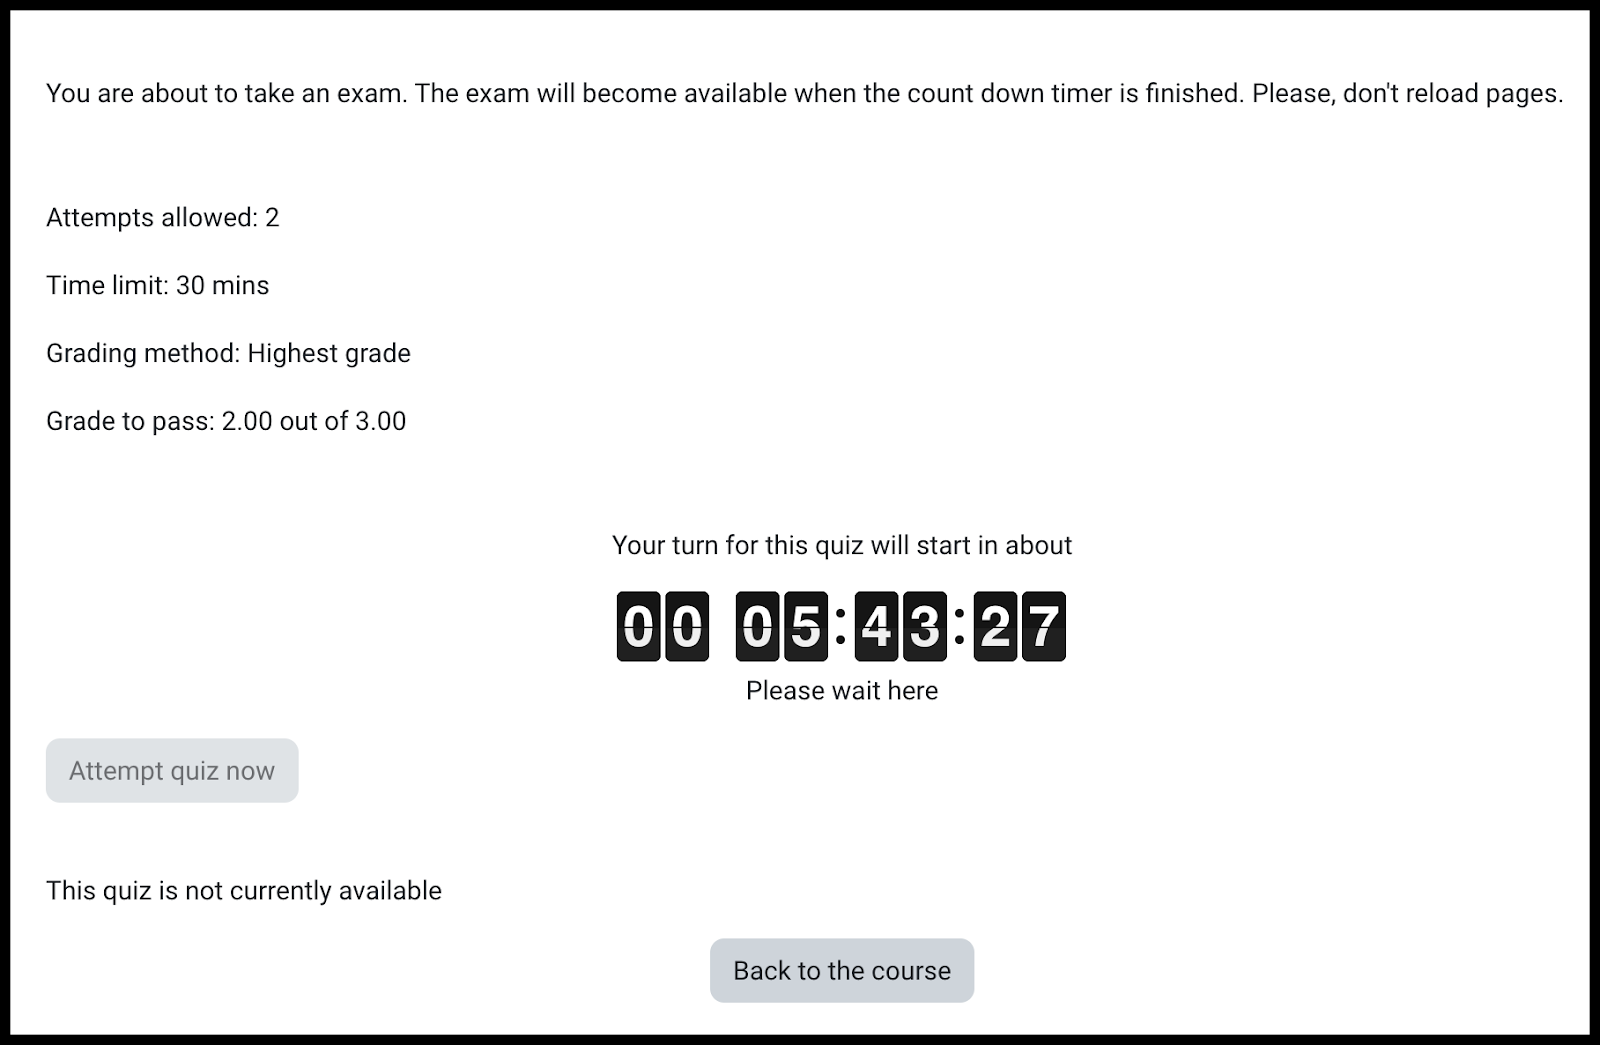 View of what students see when they enter a quiz prior to its opening; countdown clock in hours, minutes, and seconds is in the center and Back to the course button at the bottom center of the page